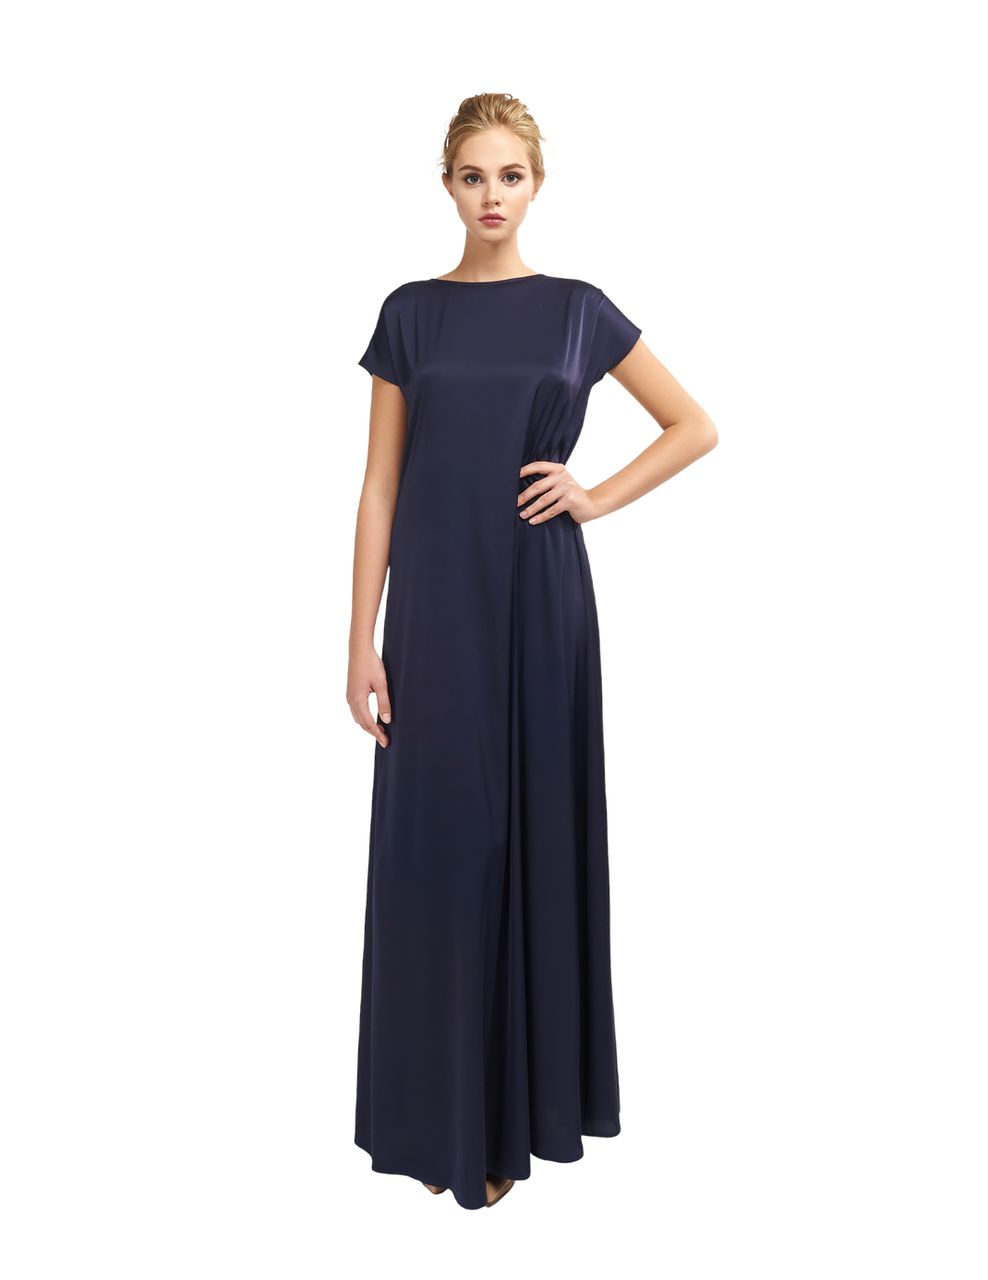 Evening dress from flowing silk with a low back neckline.